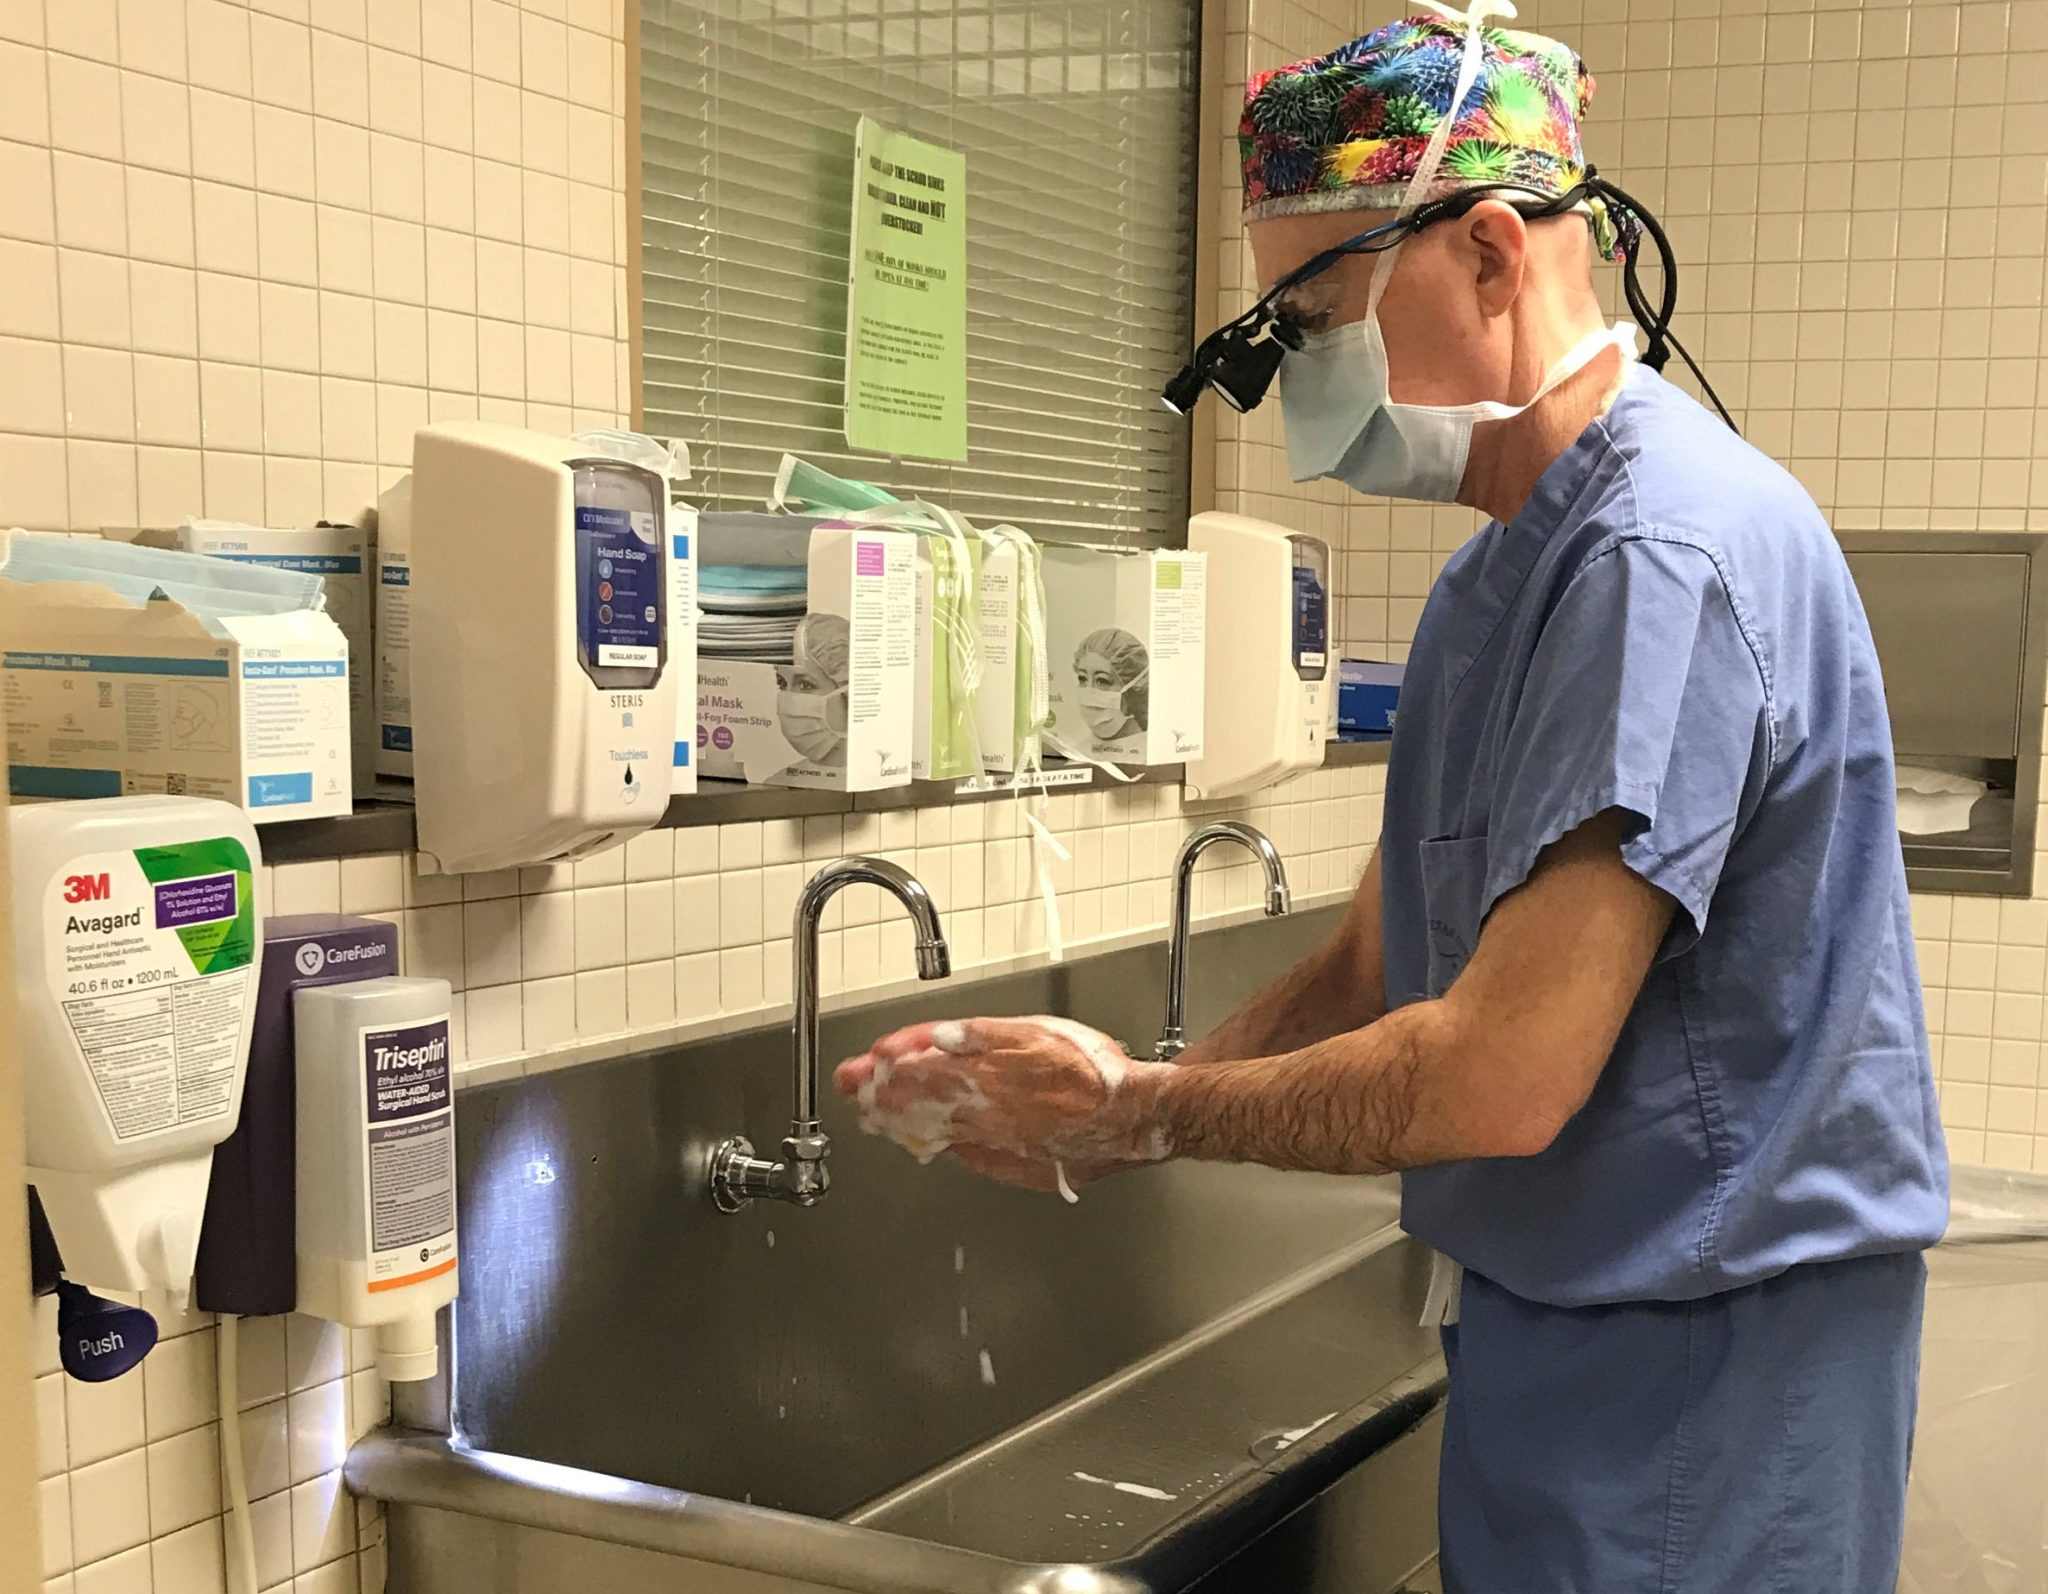 Fort Worth surgeon Dr. Kunkel washing hands before surgery